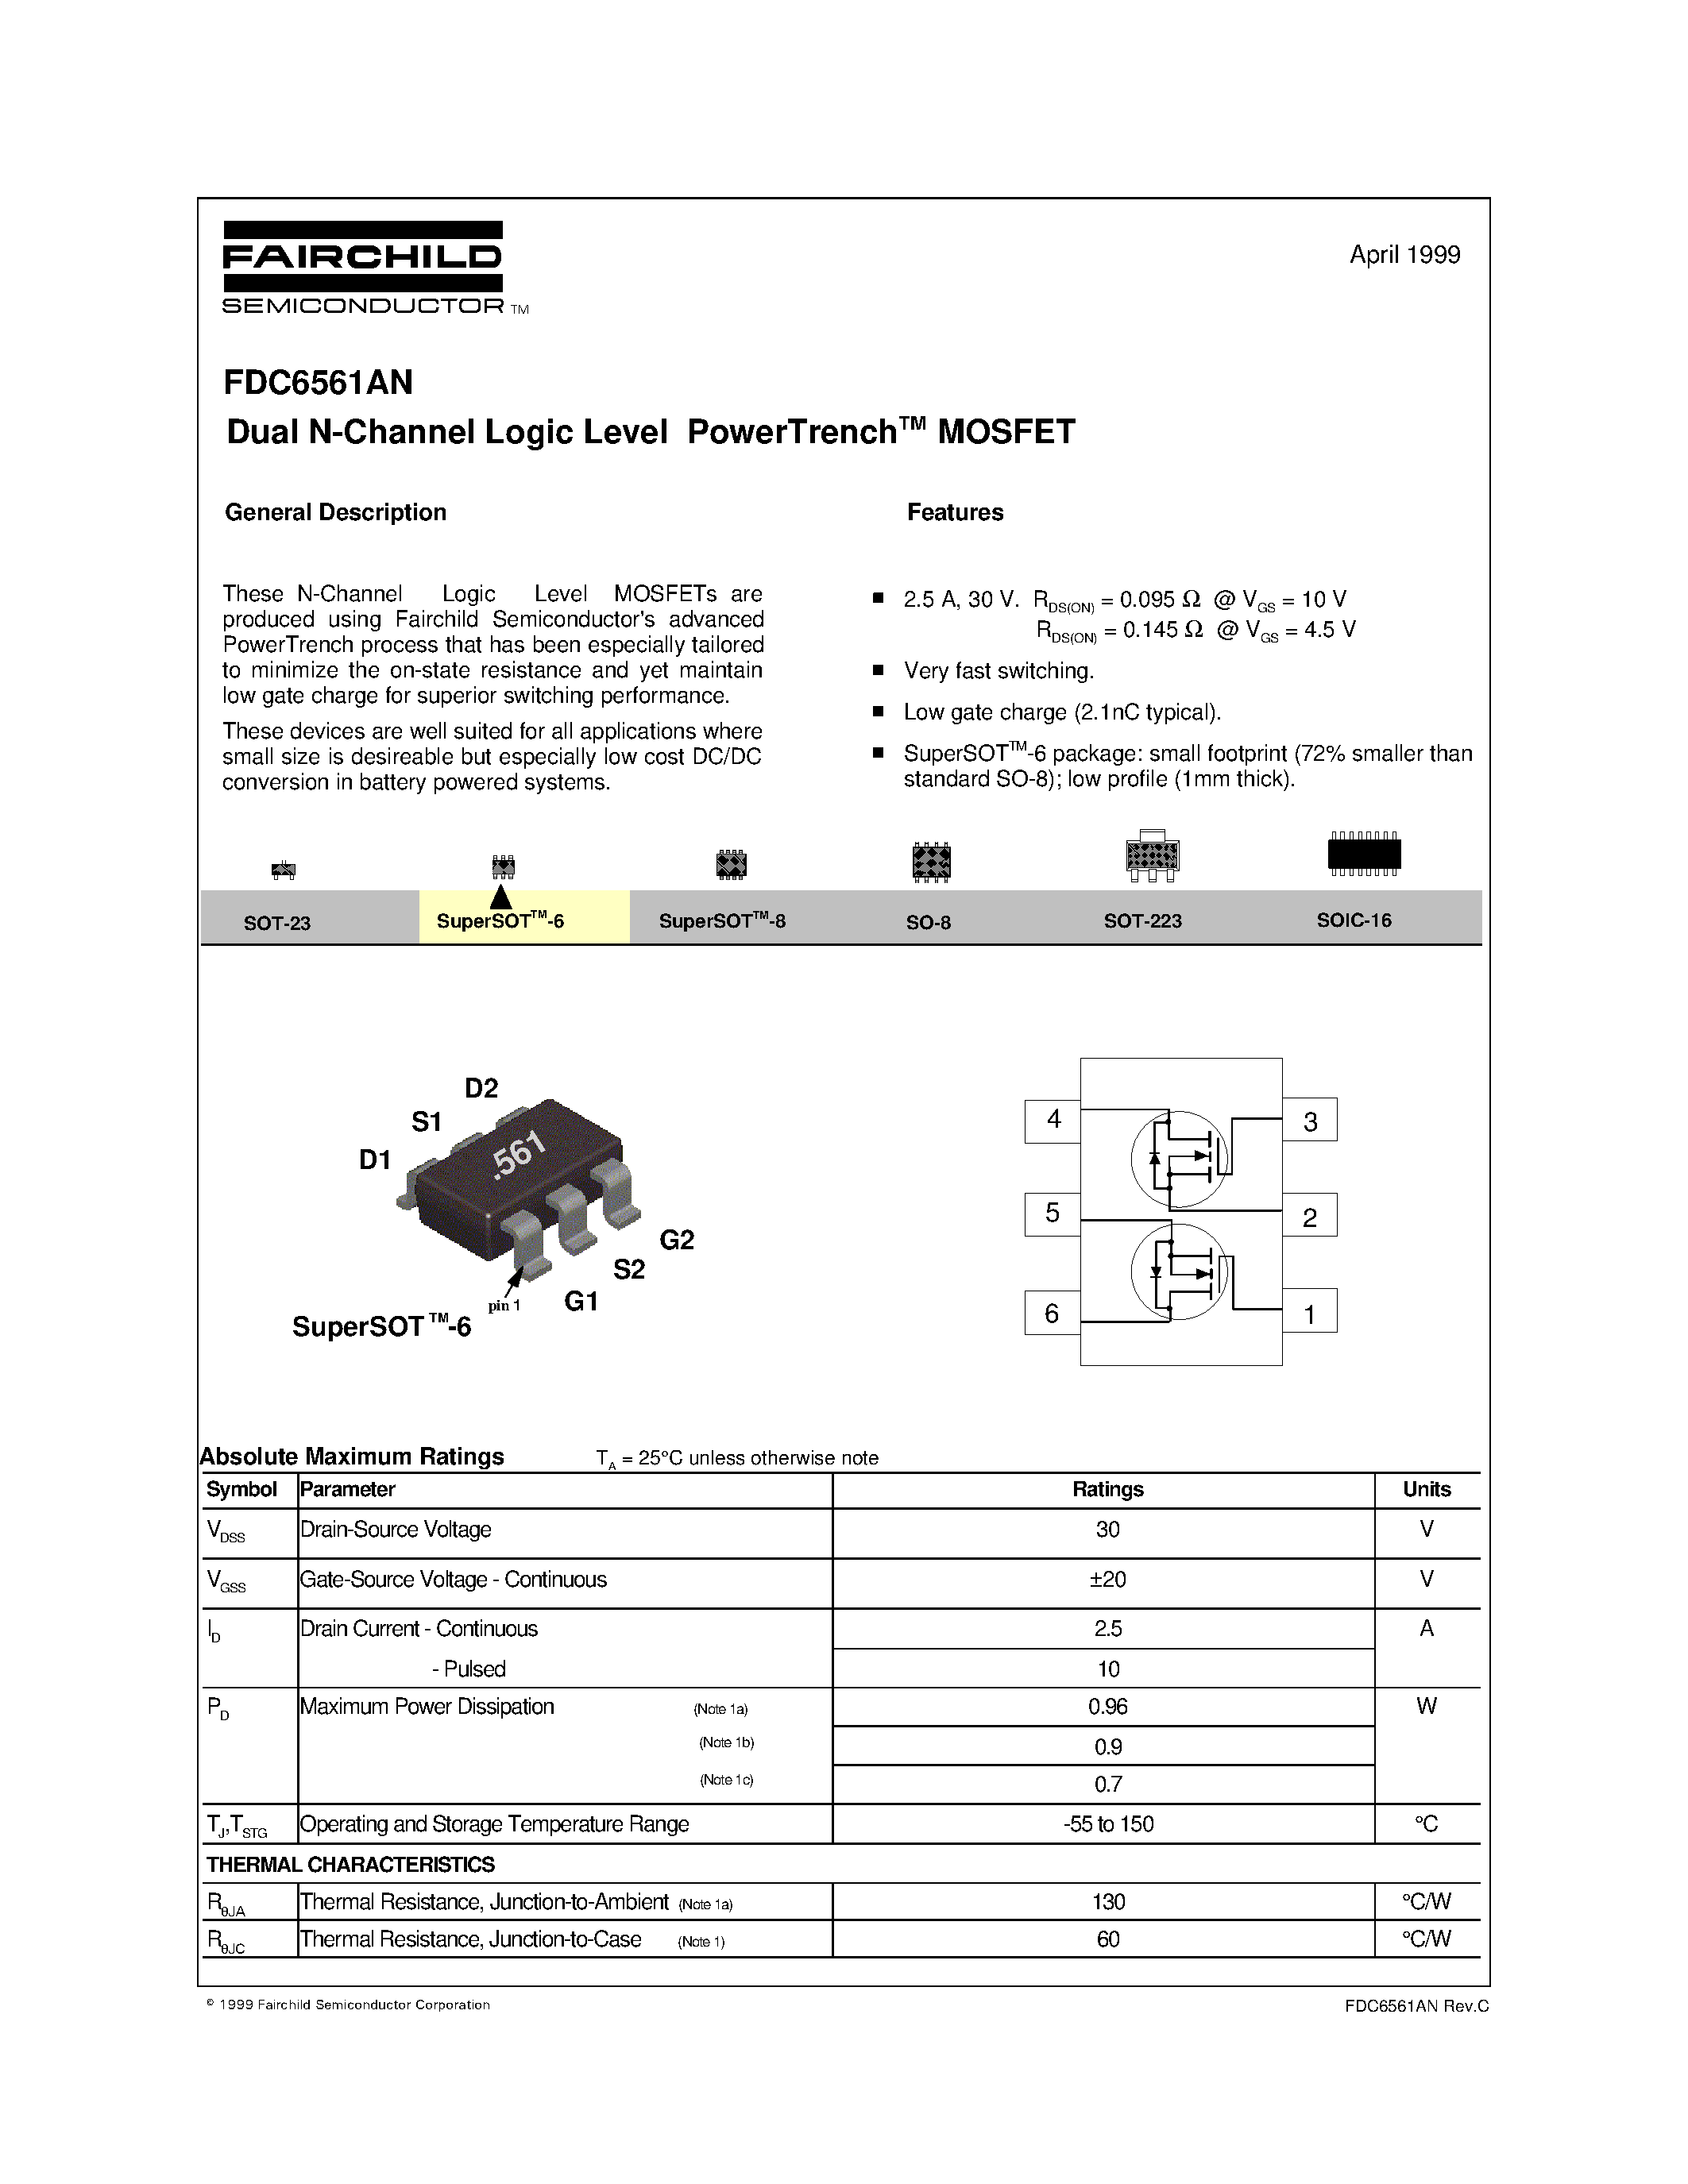 Datasheet FDC6561 - Dual N-Channel Logic Level PowerTrenchTM MOSFET page 1